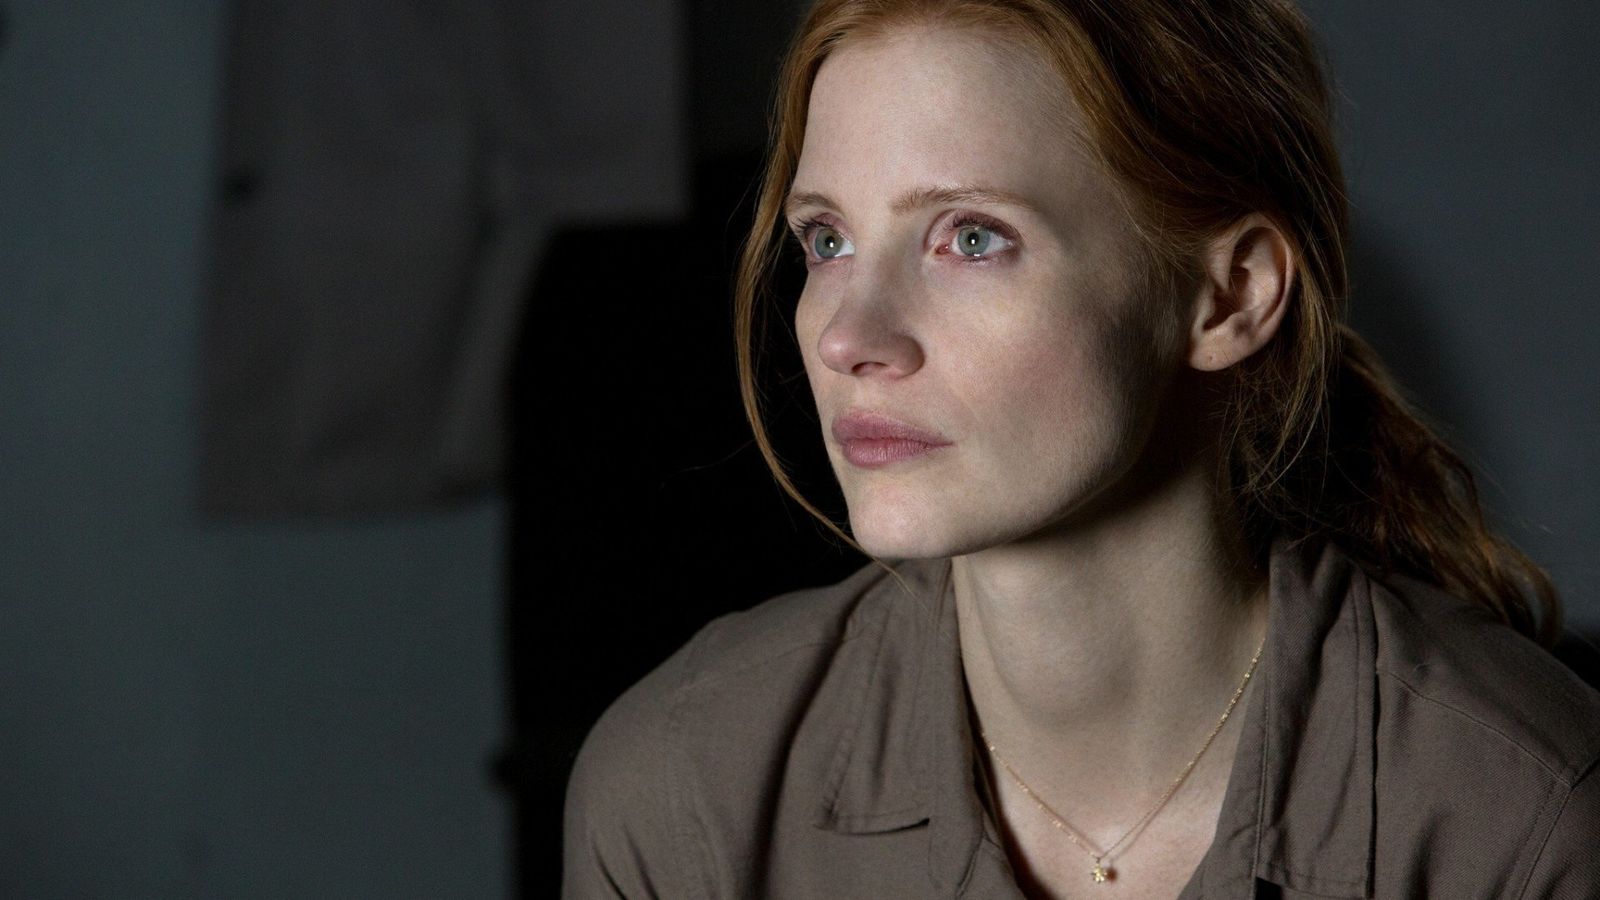 Jessica Chastain: I Think It's All Women's Responsibility To Step Forward